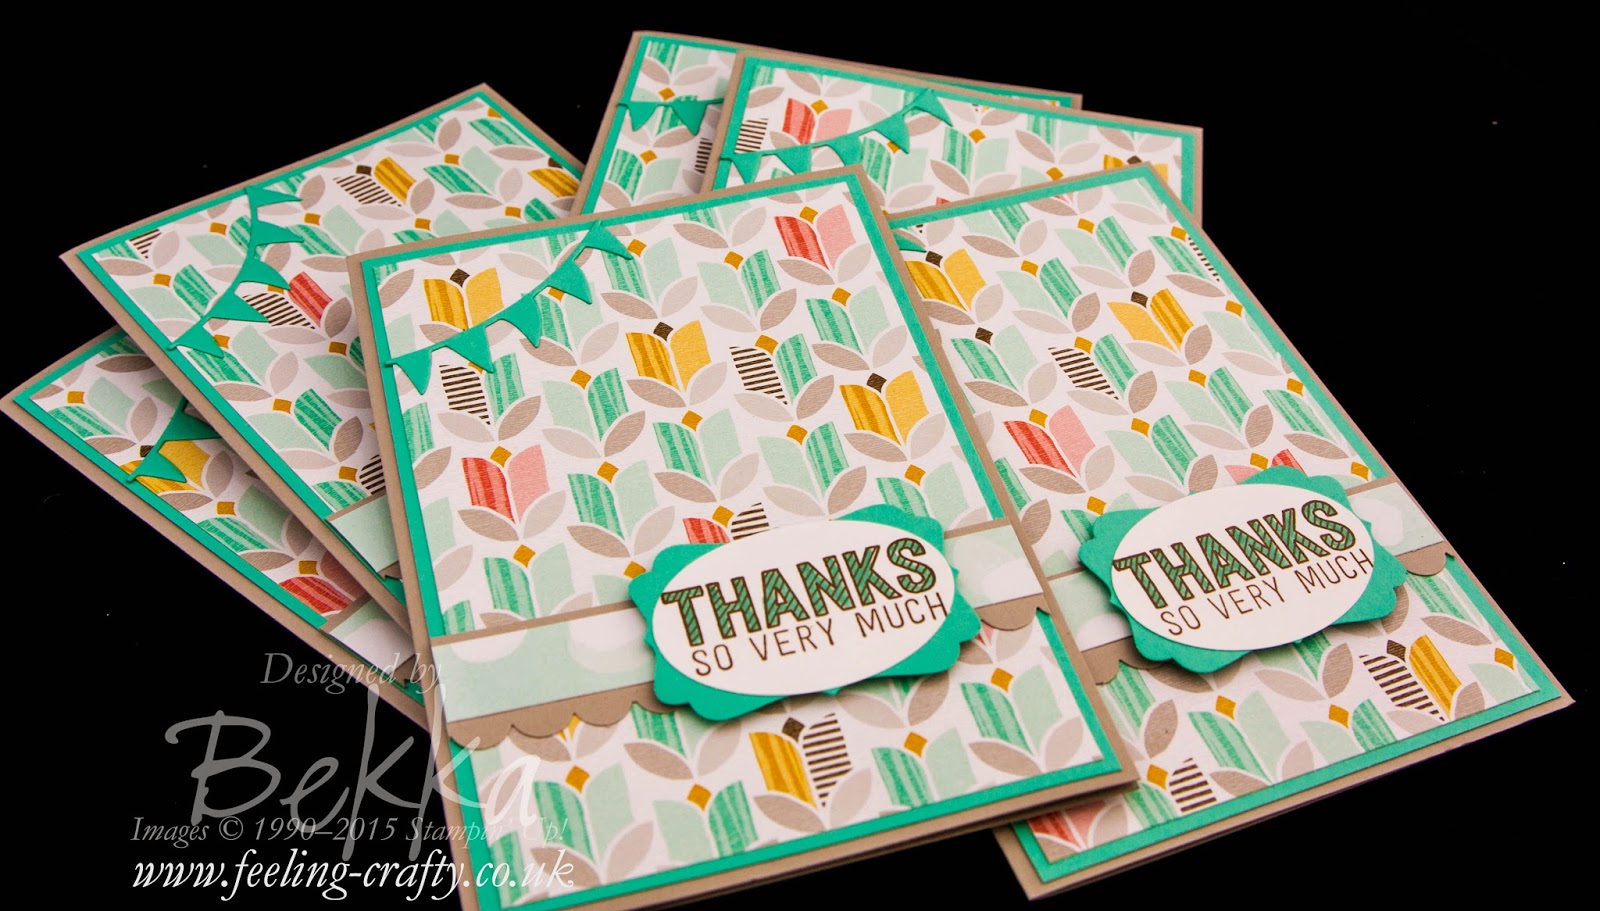 Simply Wonderful Thank You Cards - Check this blog for lots of cute ideas